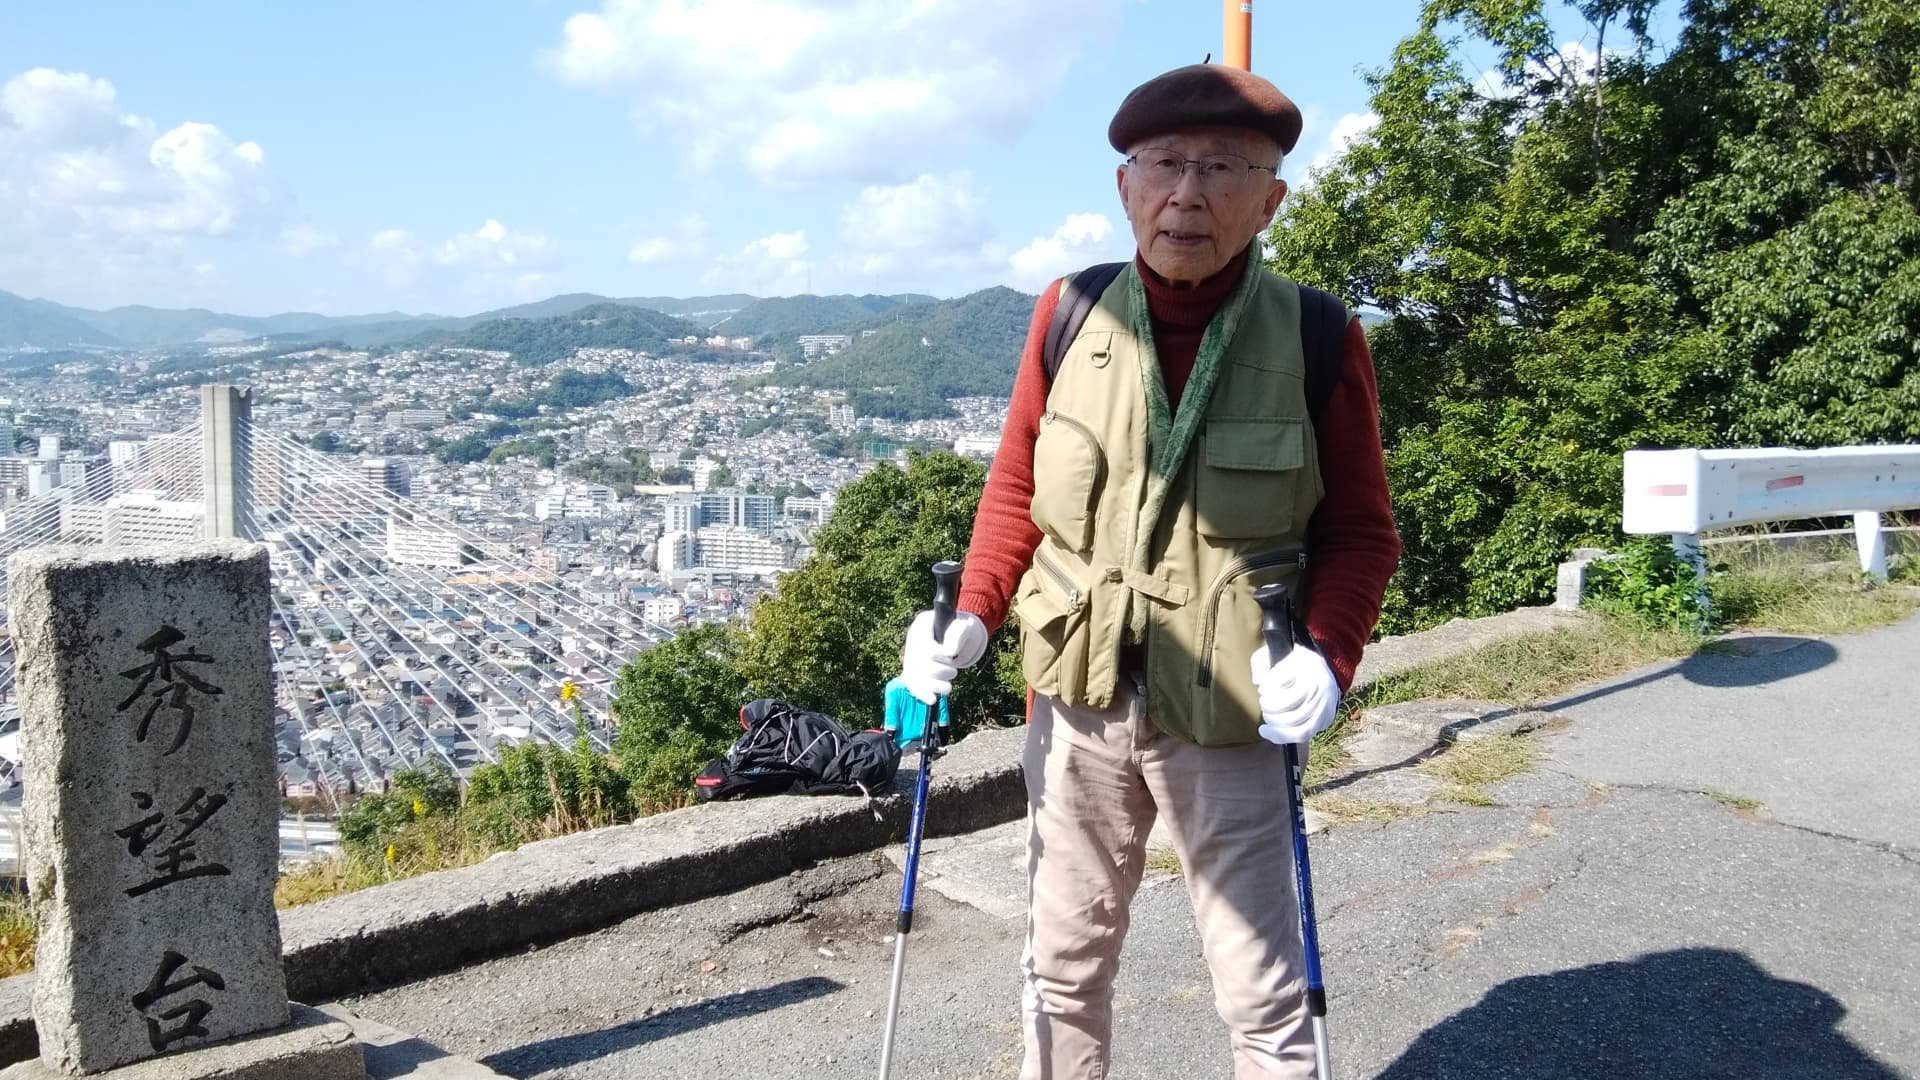 My 95-year-old Japanese grandfather is a former cardiologist—his 8 'non-negotiables' for a long, happy life